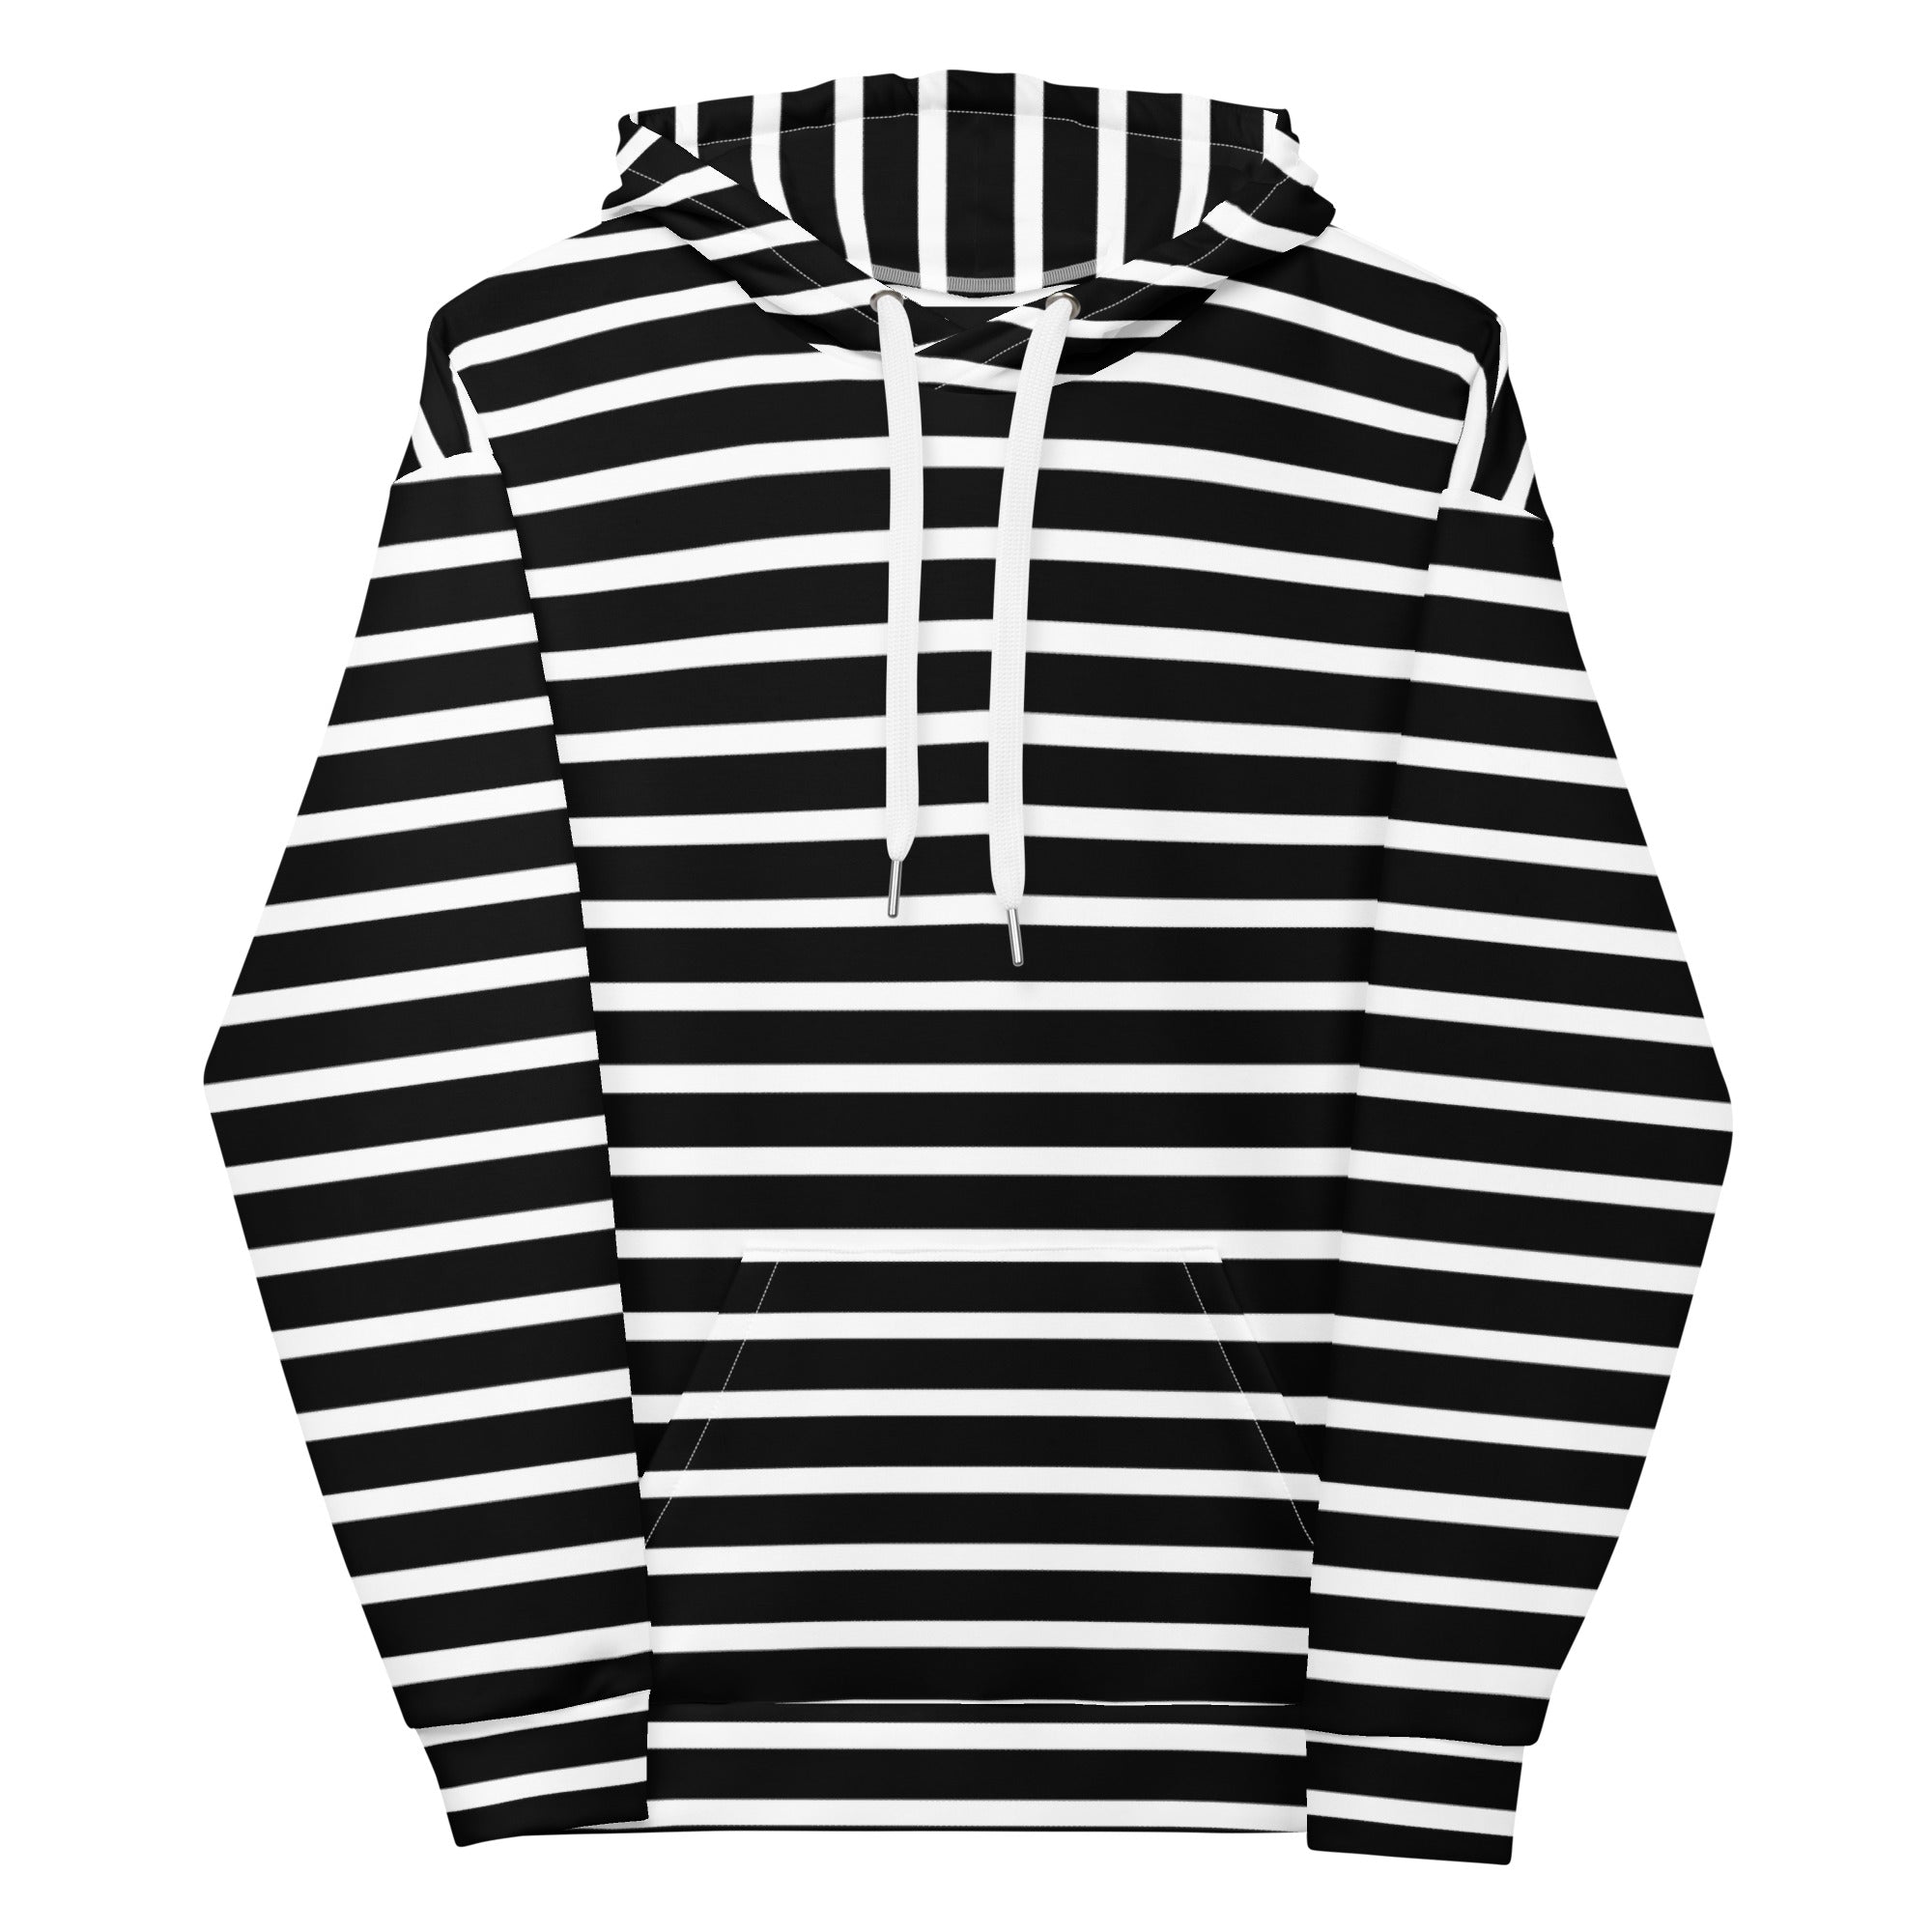 Unisex Hoodie- White and Black Striped